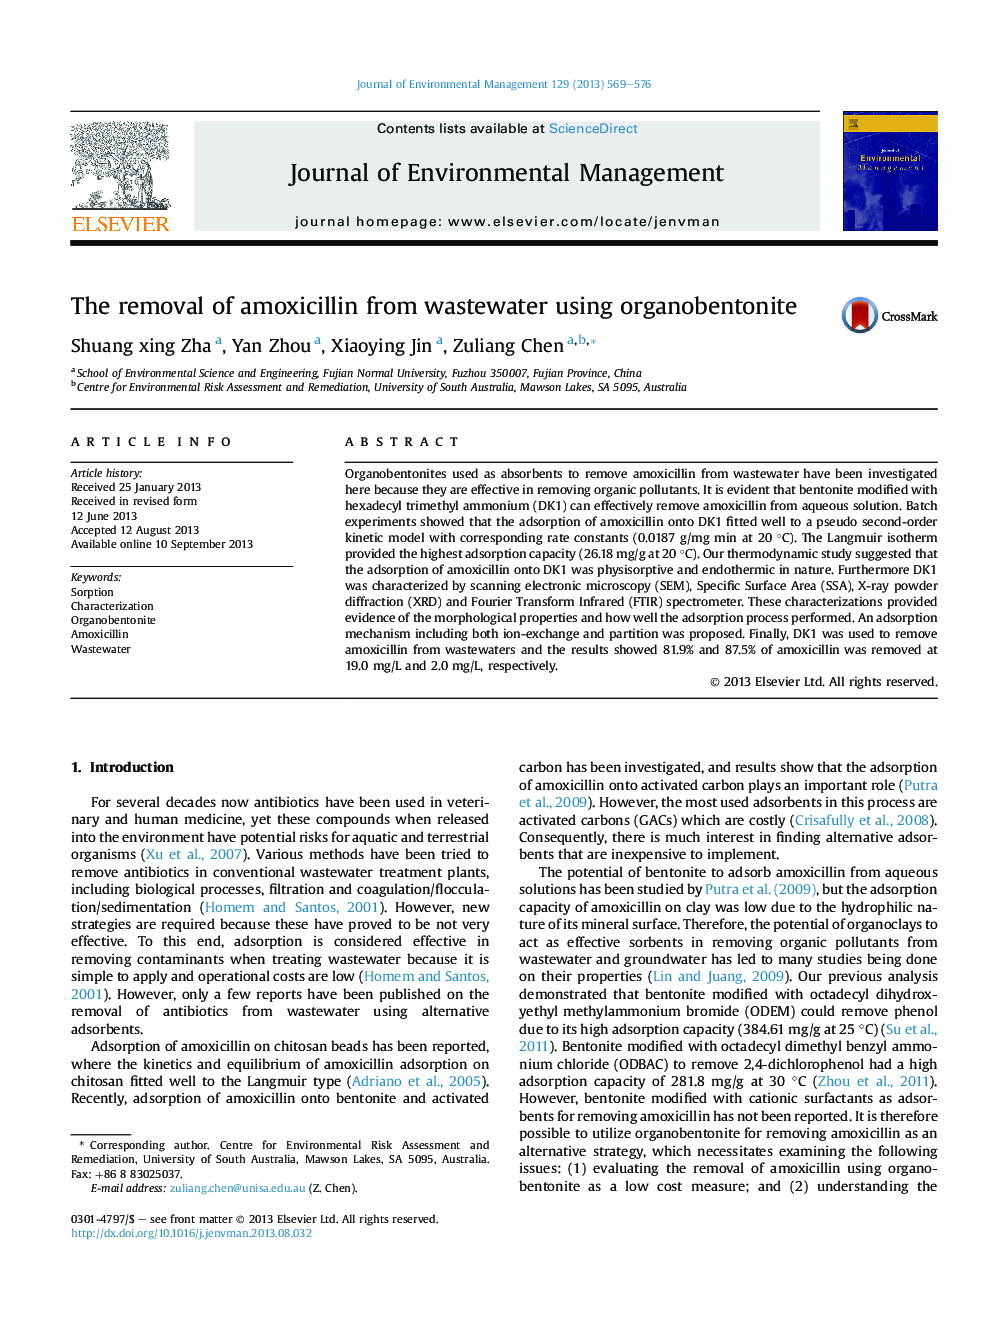 The removal of amoxicillin from wastewater using organobentonite